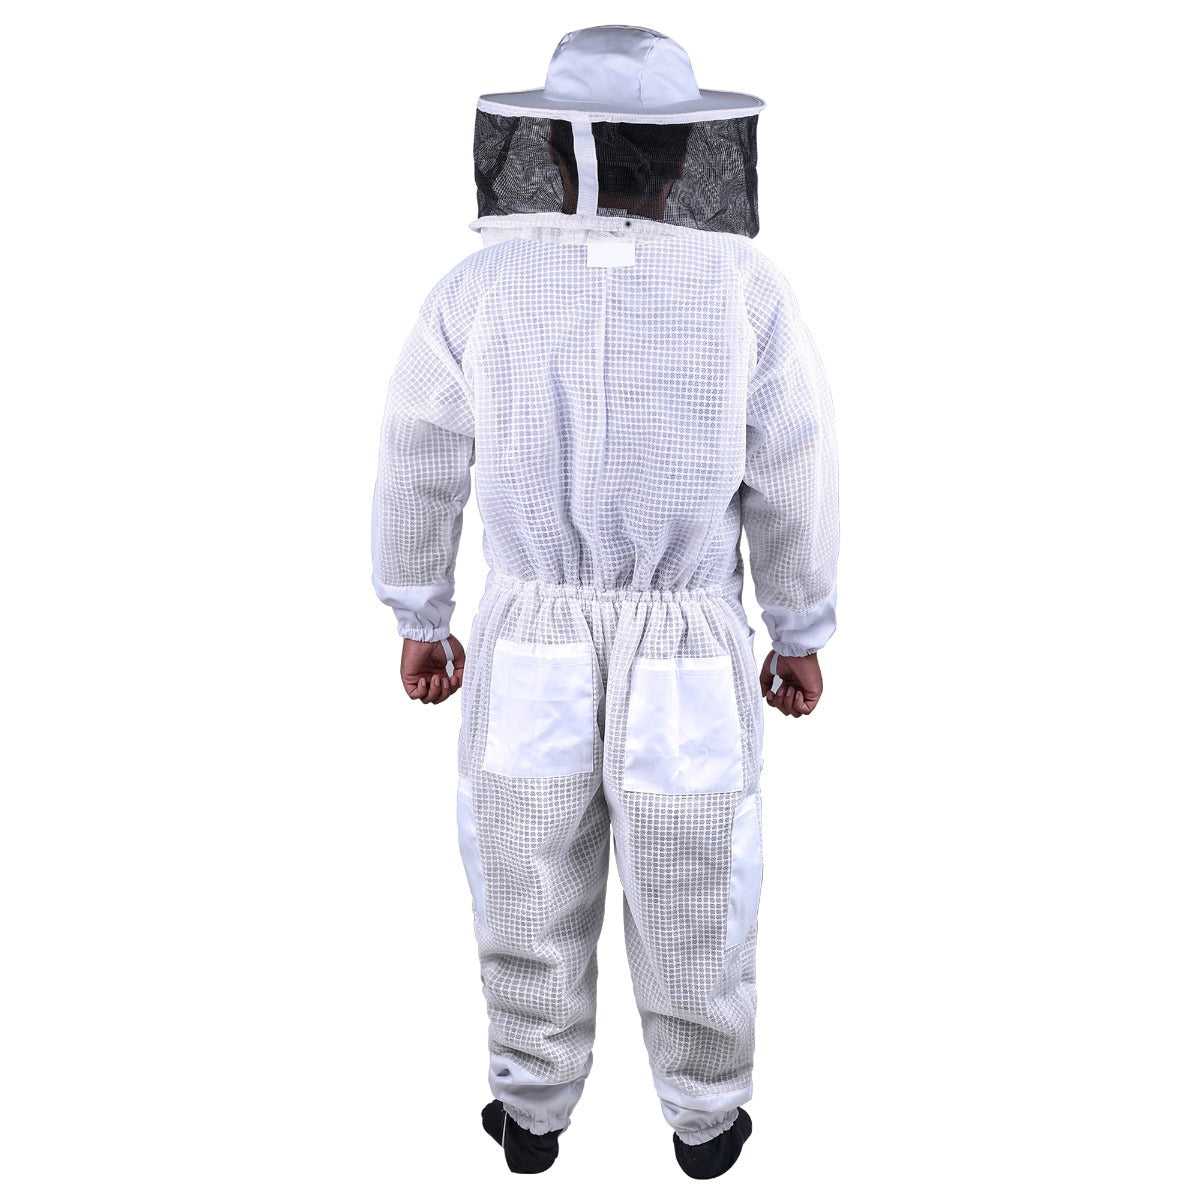 Size Large · Beekeeping · Full Suit 3